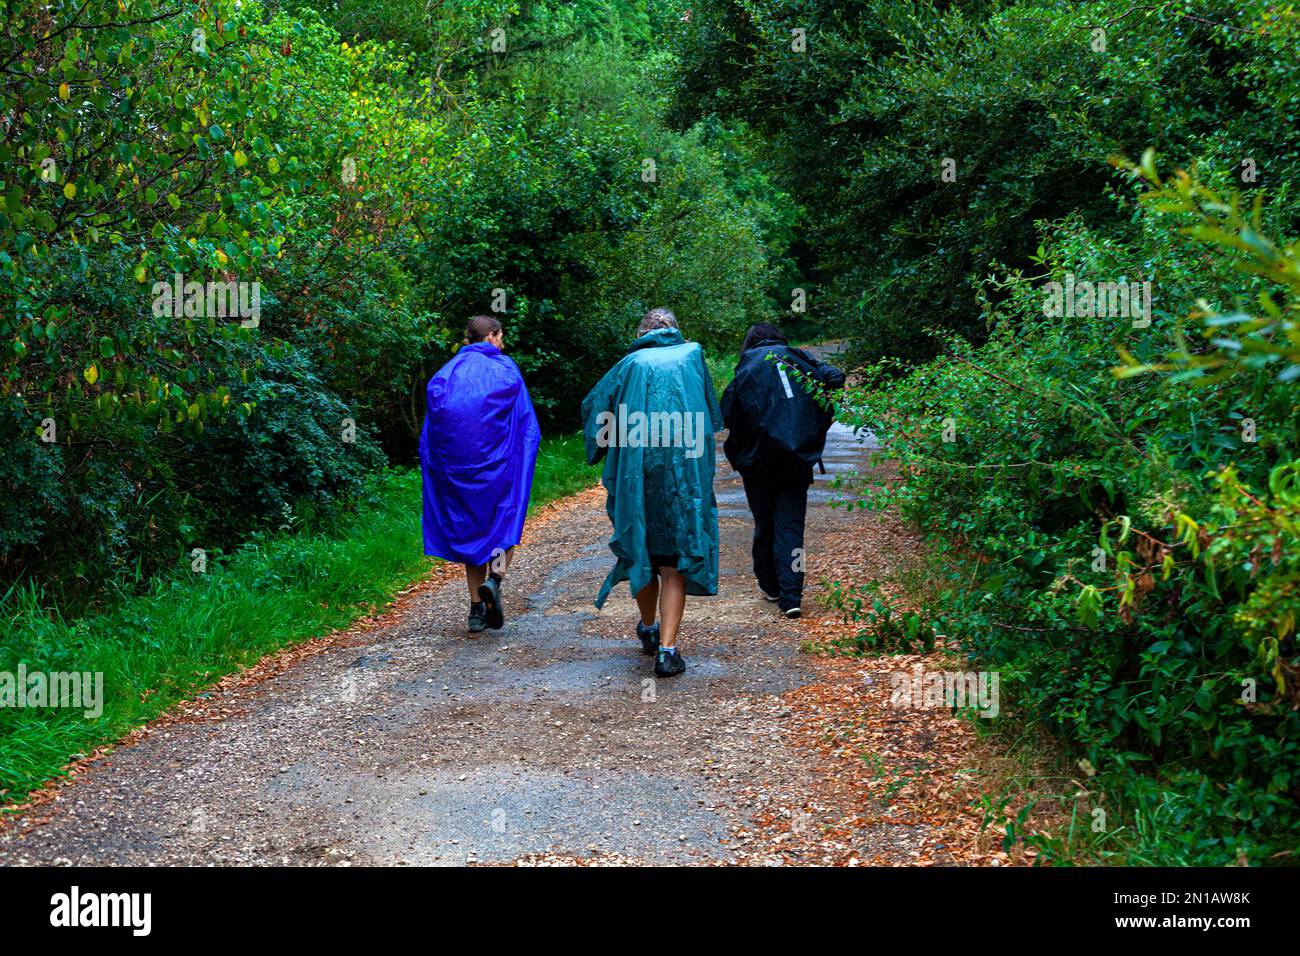 Pilgrims walking on the countryside road at Rainy day during the Camino de Santiago or Way of St James, Spain Stock Photo